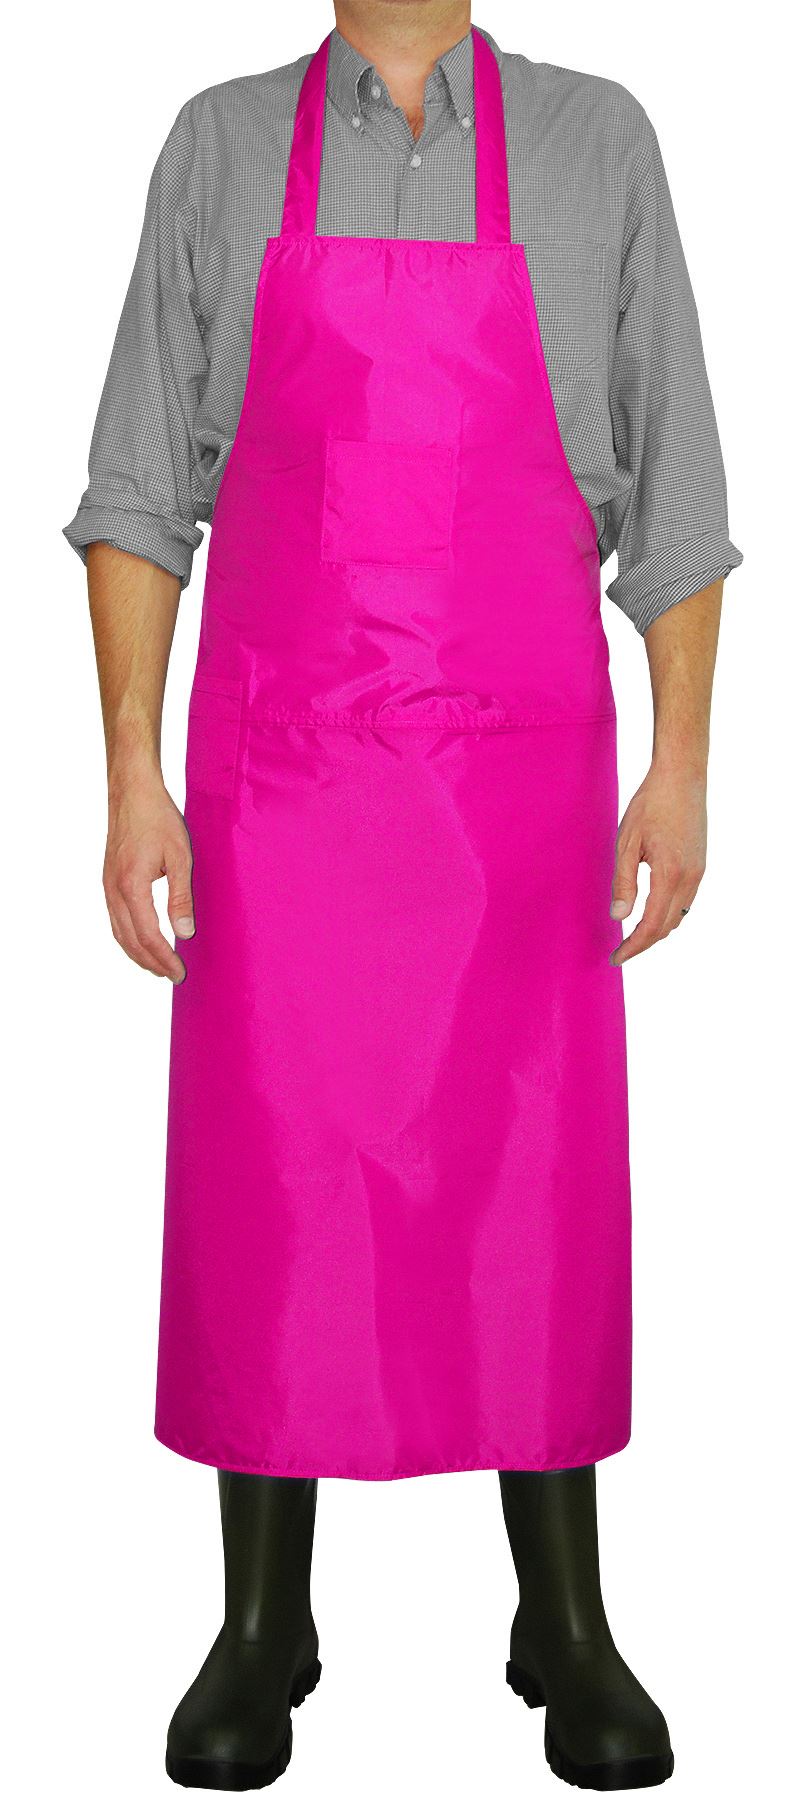 Coburn Nylon Dairy Apron - Available in White or Neon Pink